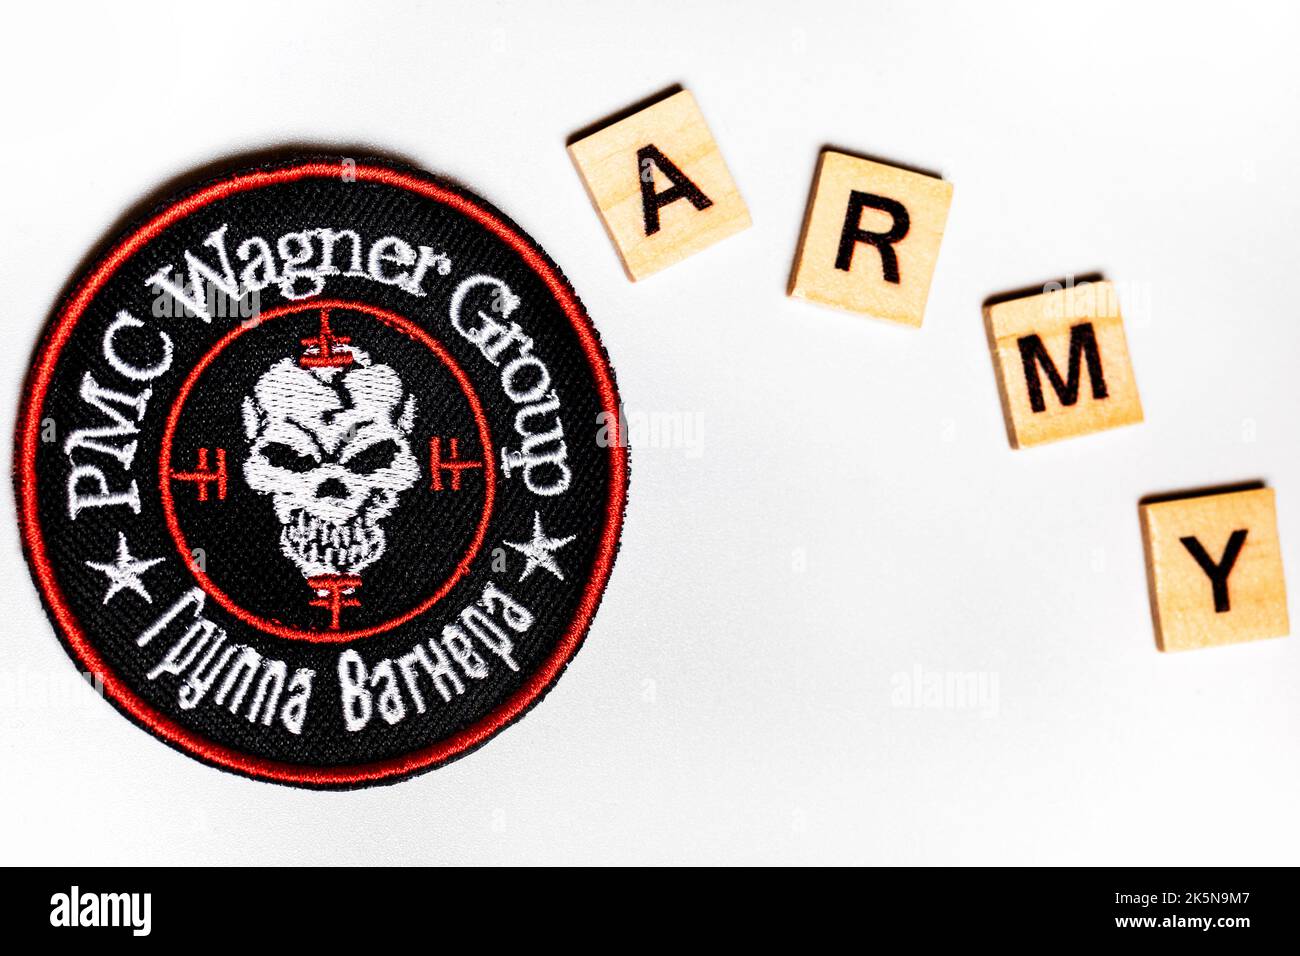 View of a logo of the Russian private security company 'Wagner Group' on white background Stock Photo